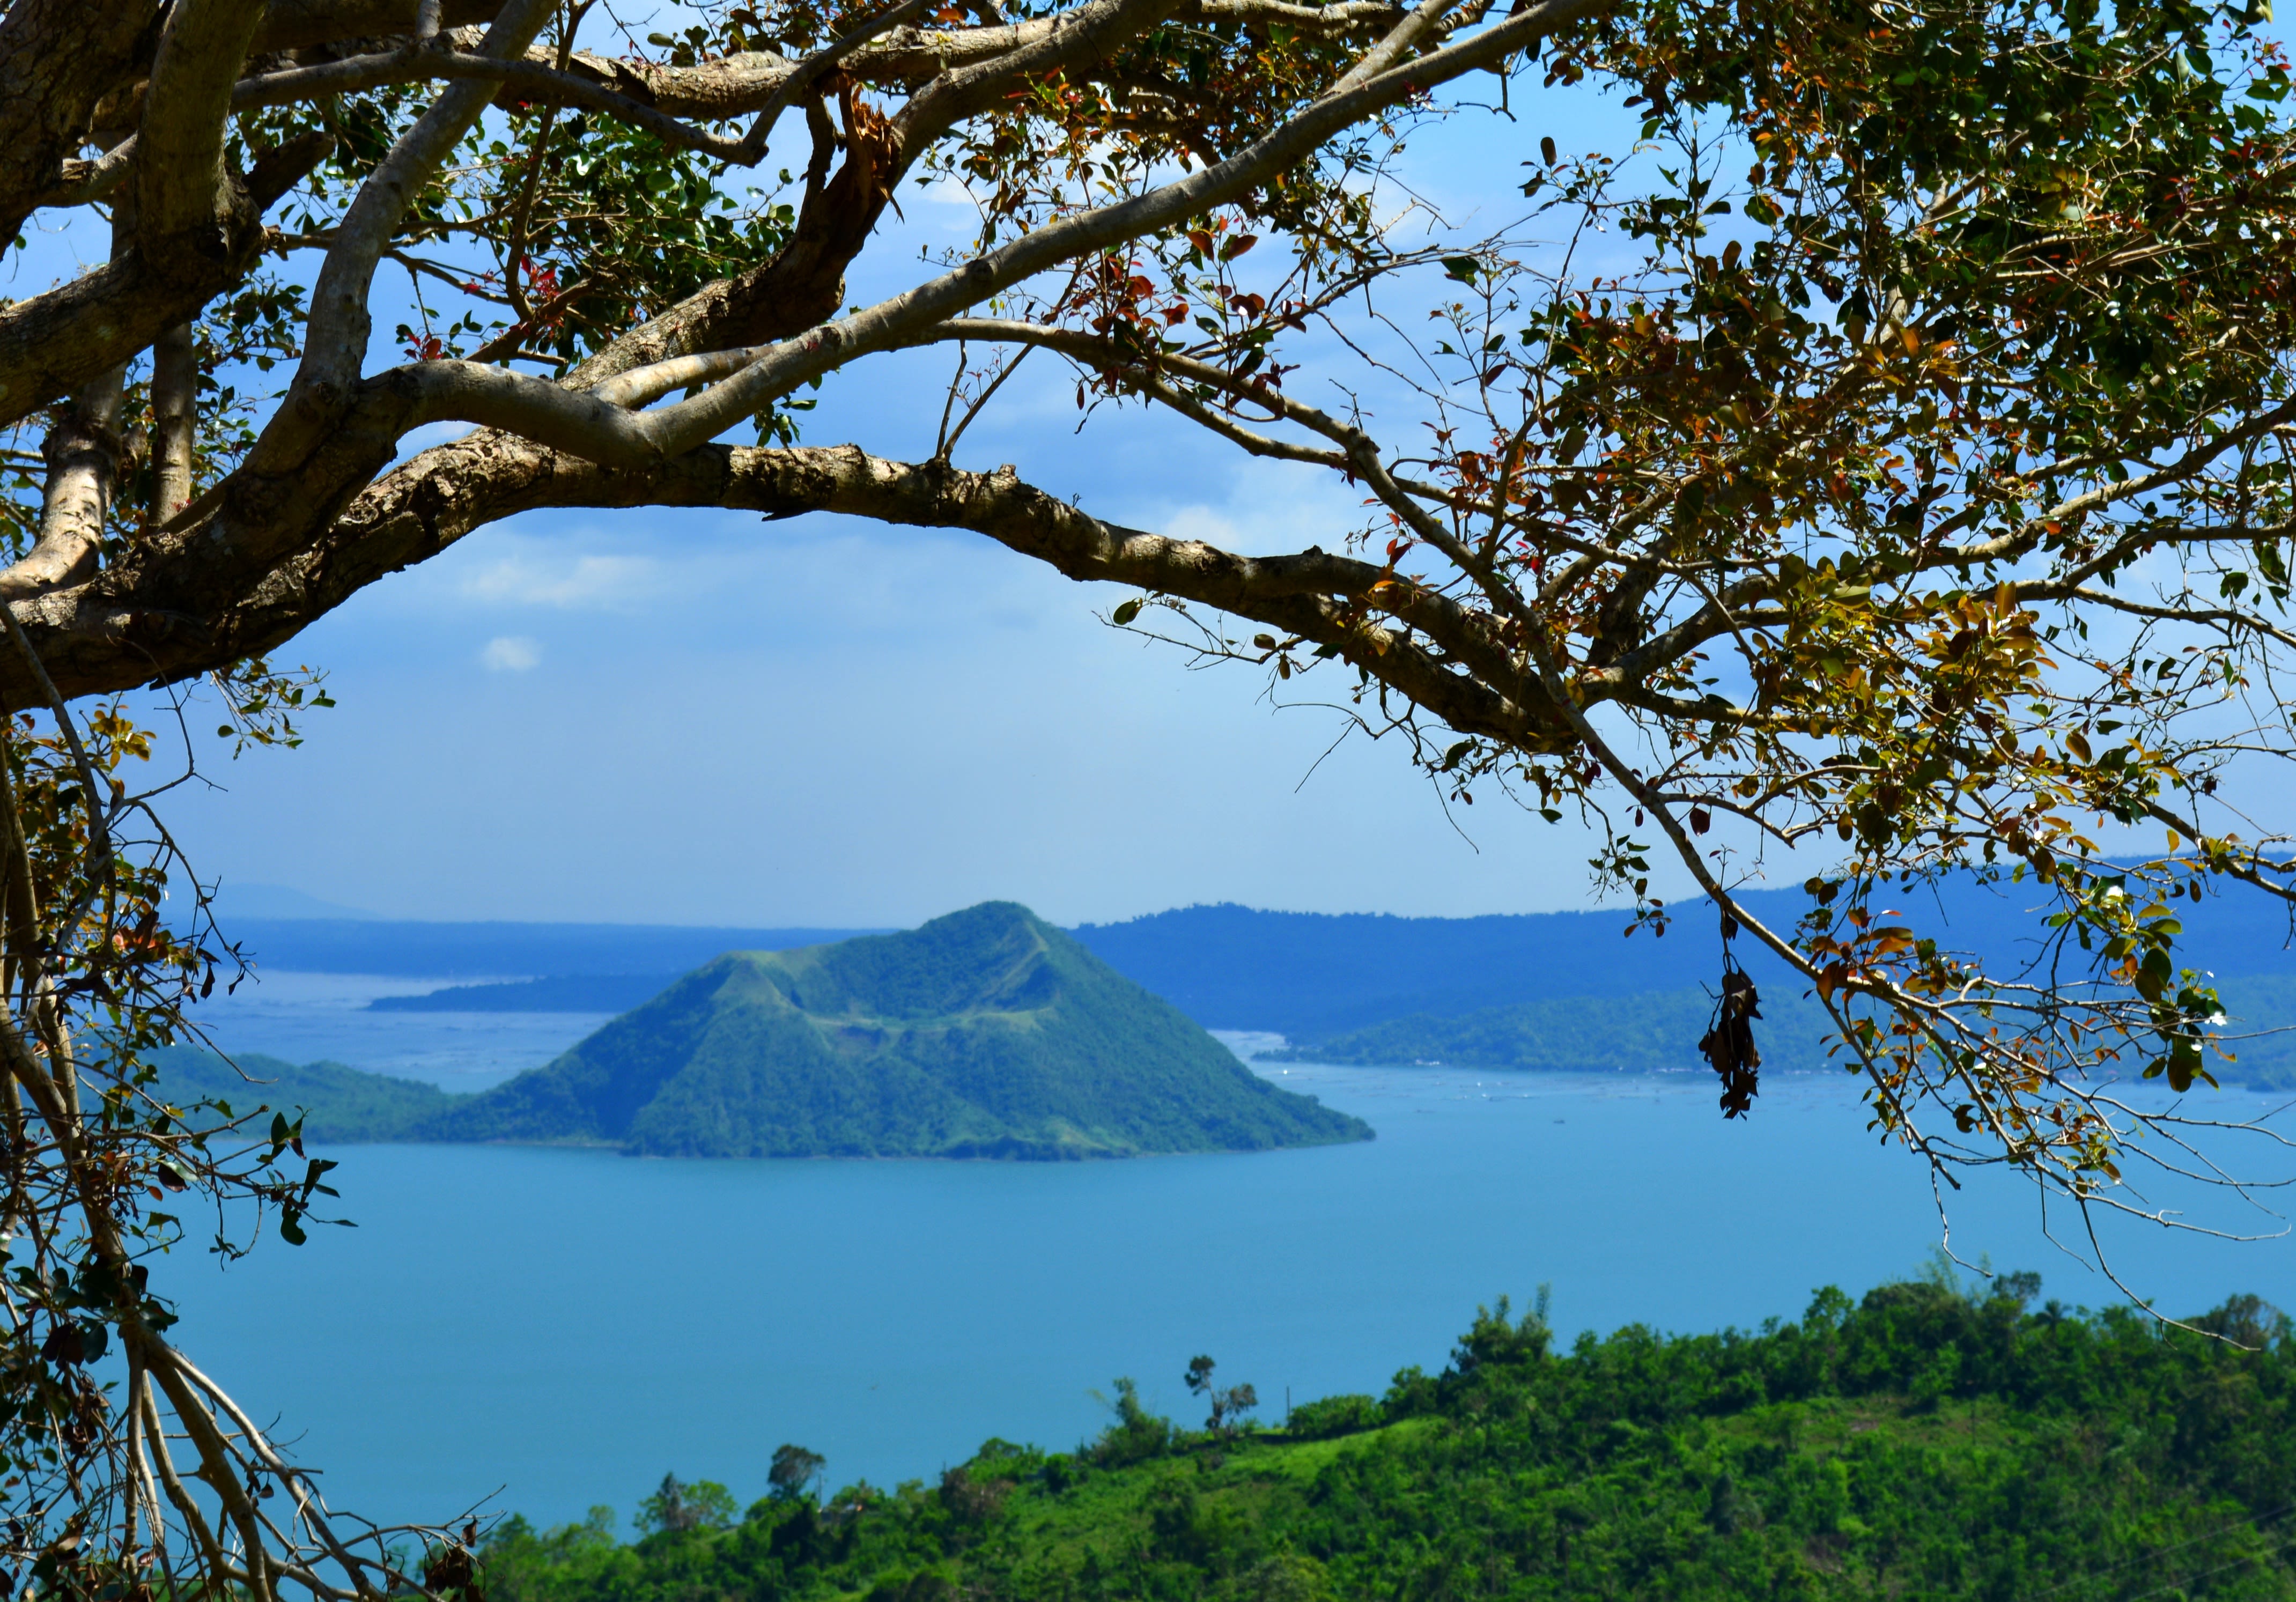 taal volcano images